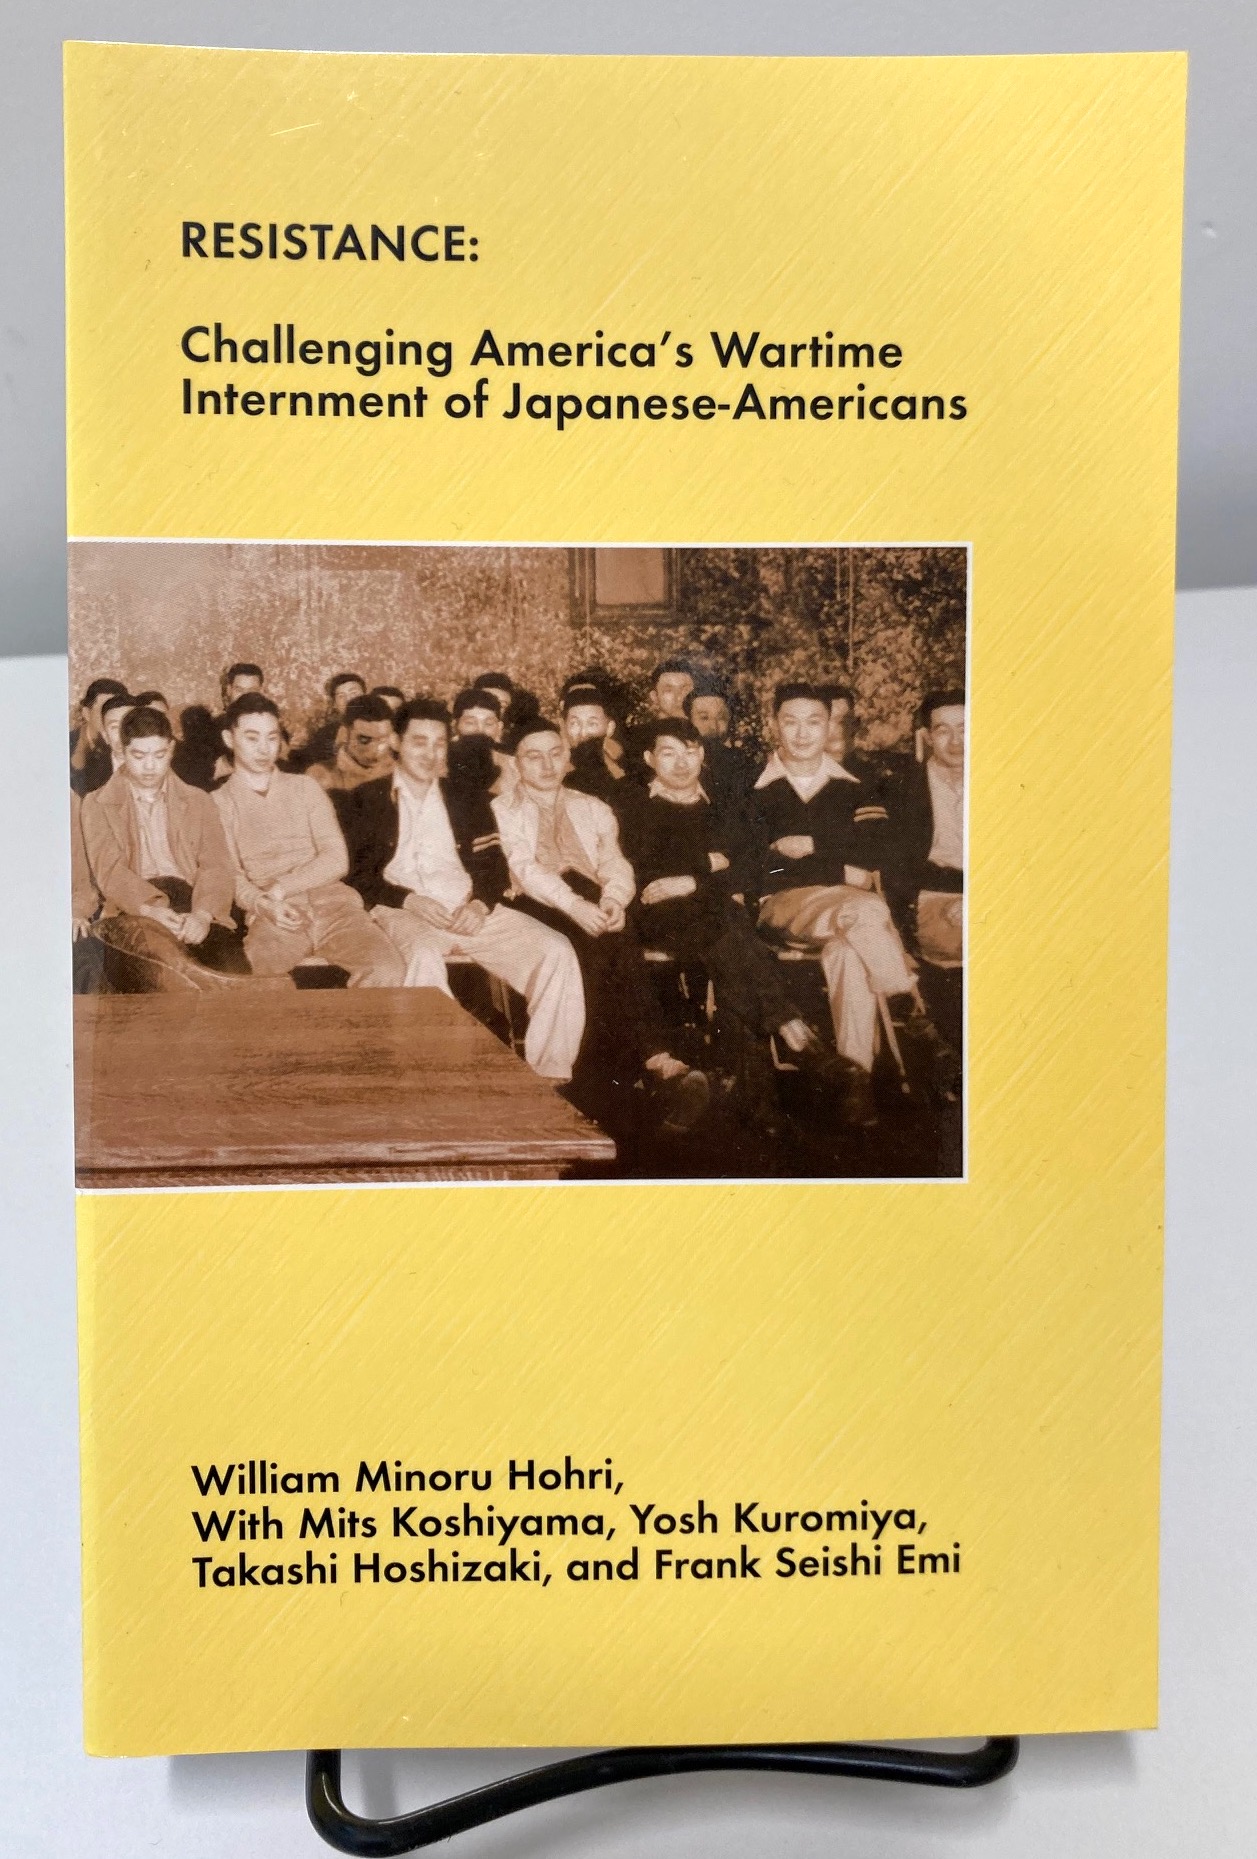 Resistance book cover with group photo of Japanese American men